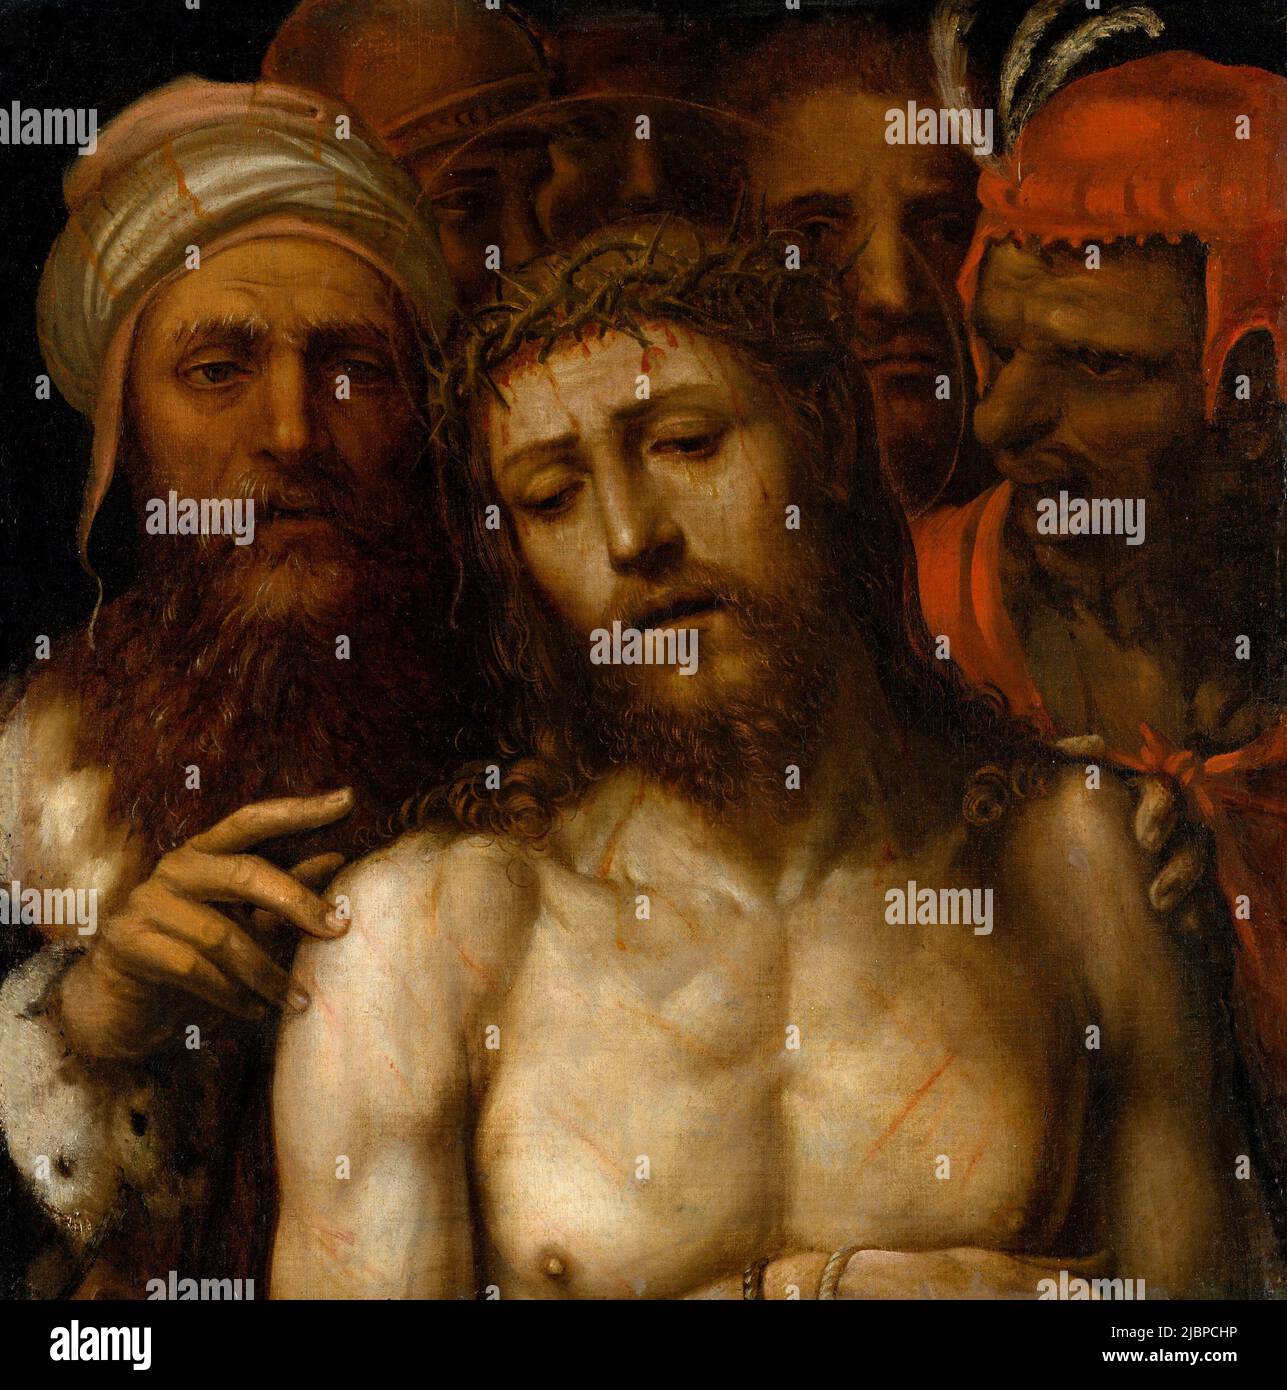 Christ Presented to the People (Ecce Homo) by Il Sodoma  (1477–1549) . The painting depicts the moment when Pontius Pilate presents a beaten and whipped Jesus to the crowd with the words Ecce Homo (Behold the man). Jesus has the crown of thorns on his head and a red or purple robe (to mock the claim to be king of the jews). Stock Photo